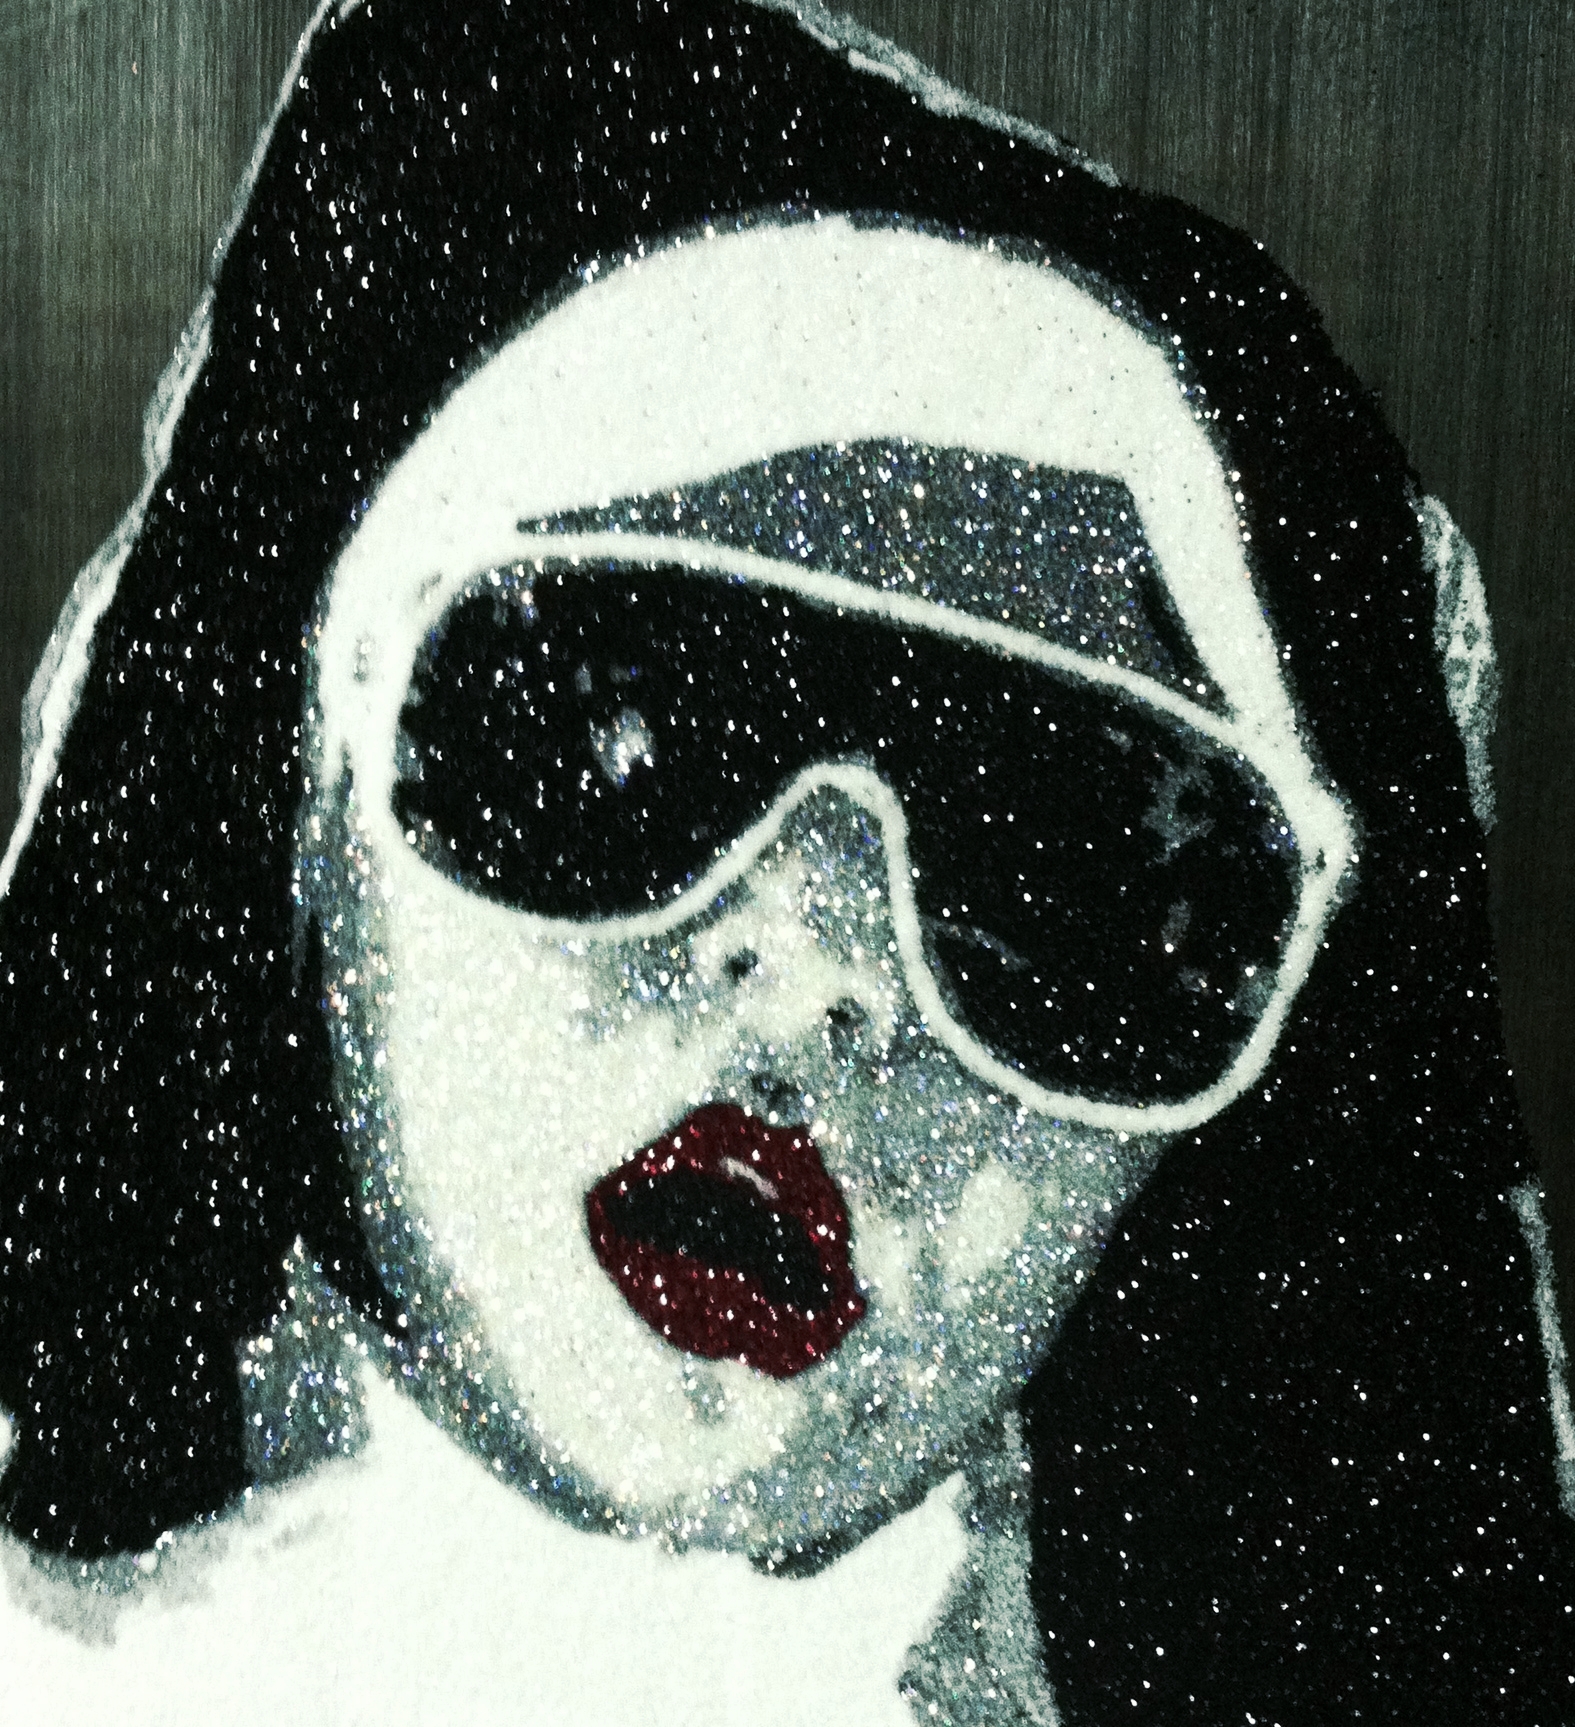  Nun With A Gun #2 Detail  glitter on plywood 